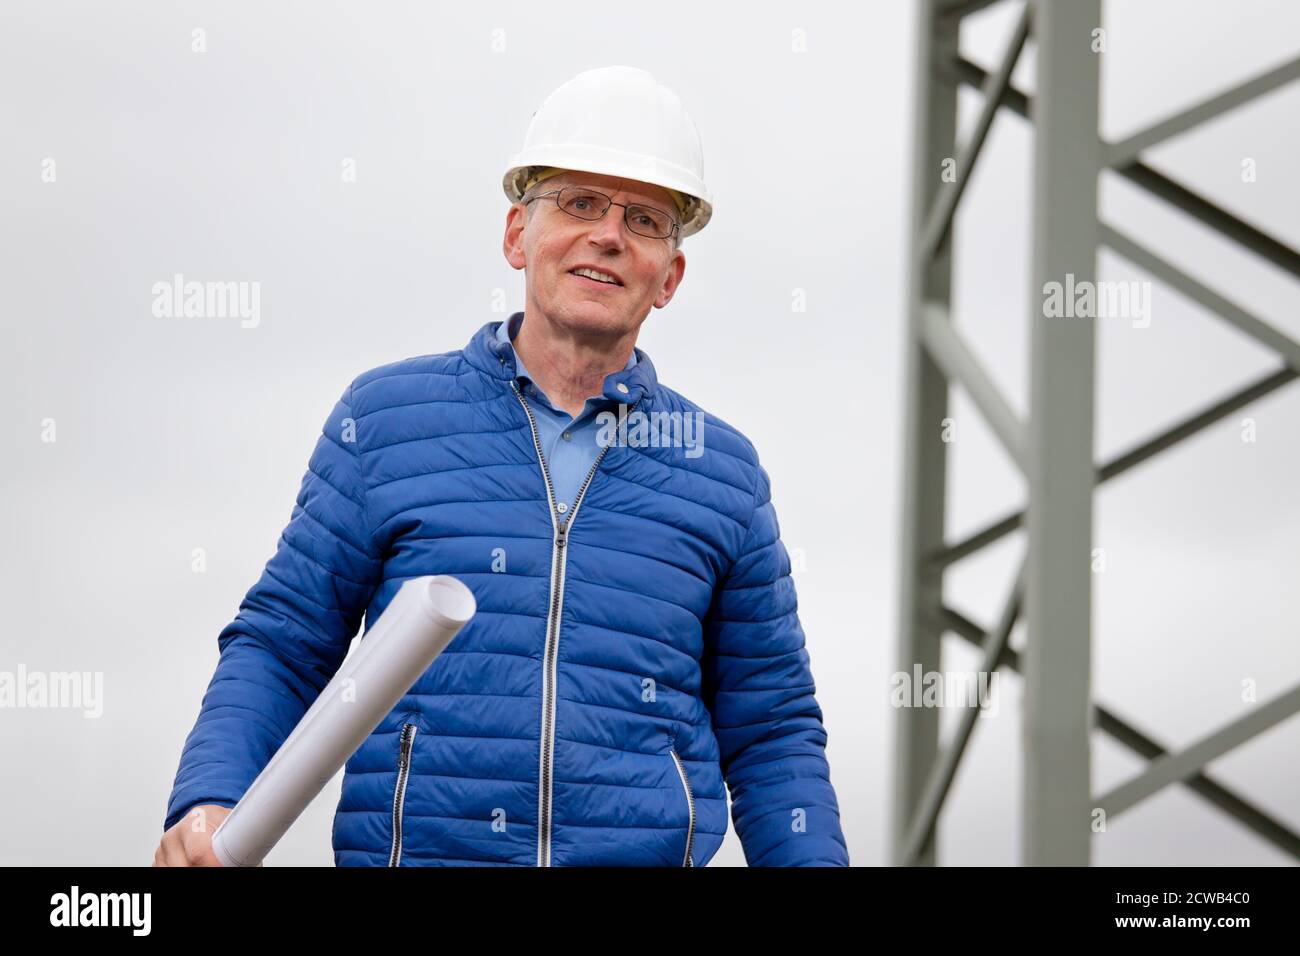 Smiling engineer with hard hat and bluepriint in his hand standing in front of an electrical pole - selective focus on the person Stock Photo